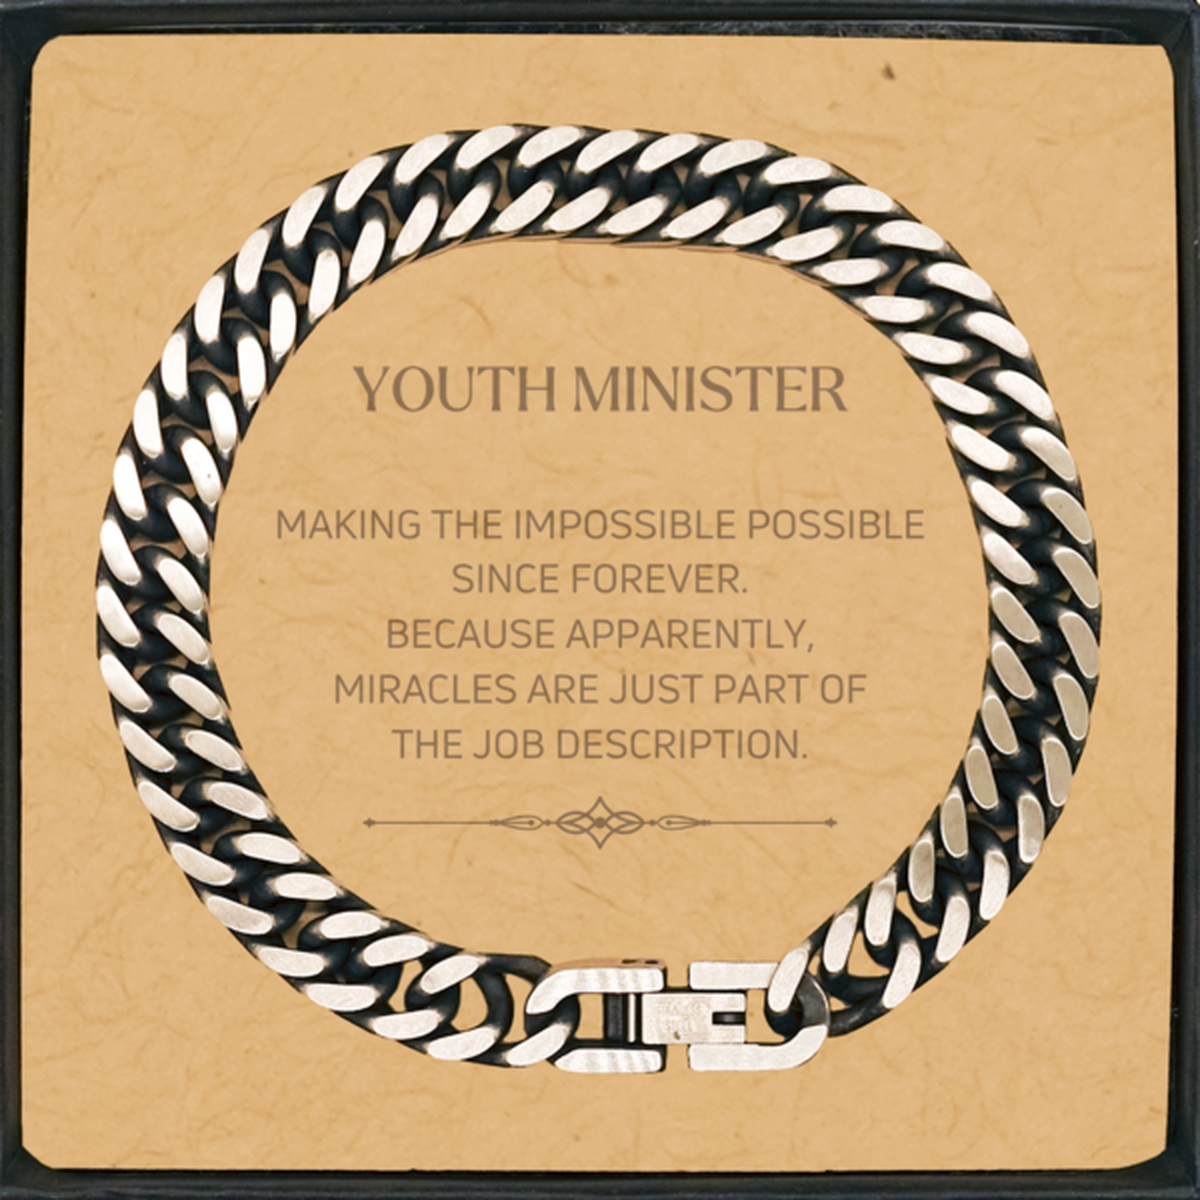 Funny Youth Minister Gifts, Miracles are just part of the job description, Inspirational Birthday Cuban Link Chain Bracelet For Youth Minister, Men, Women, Coworkers, Friends, Boss